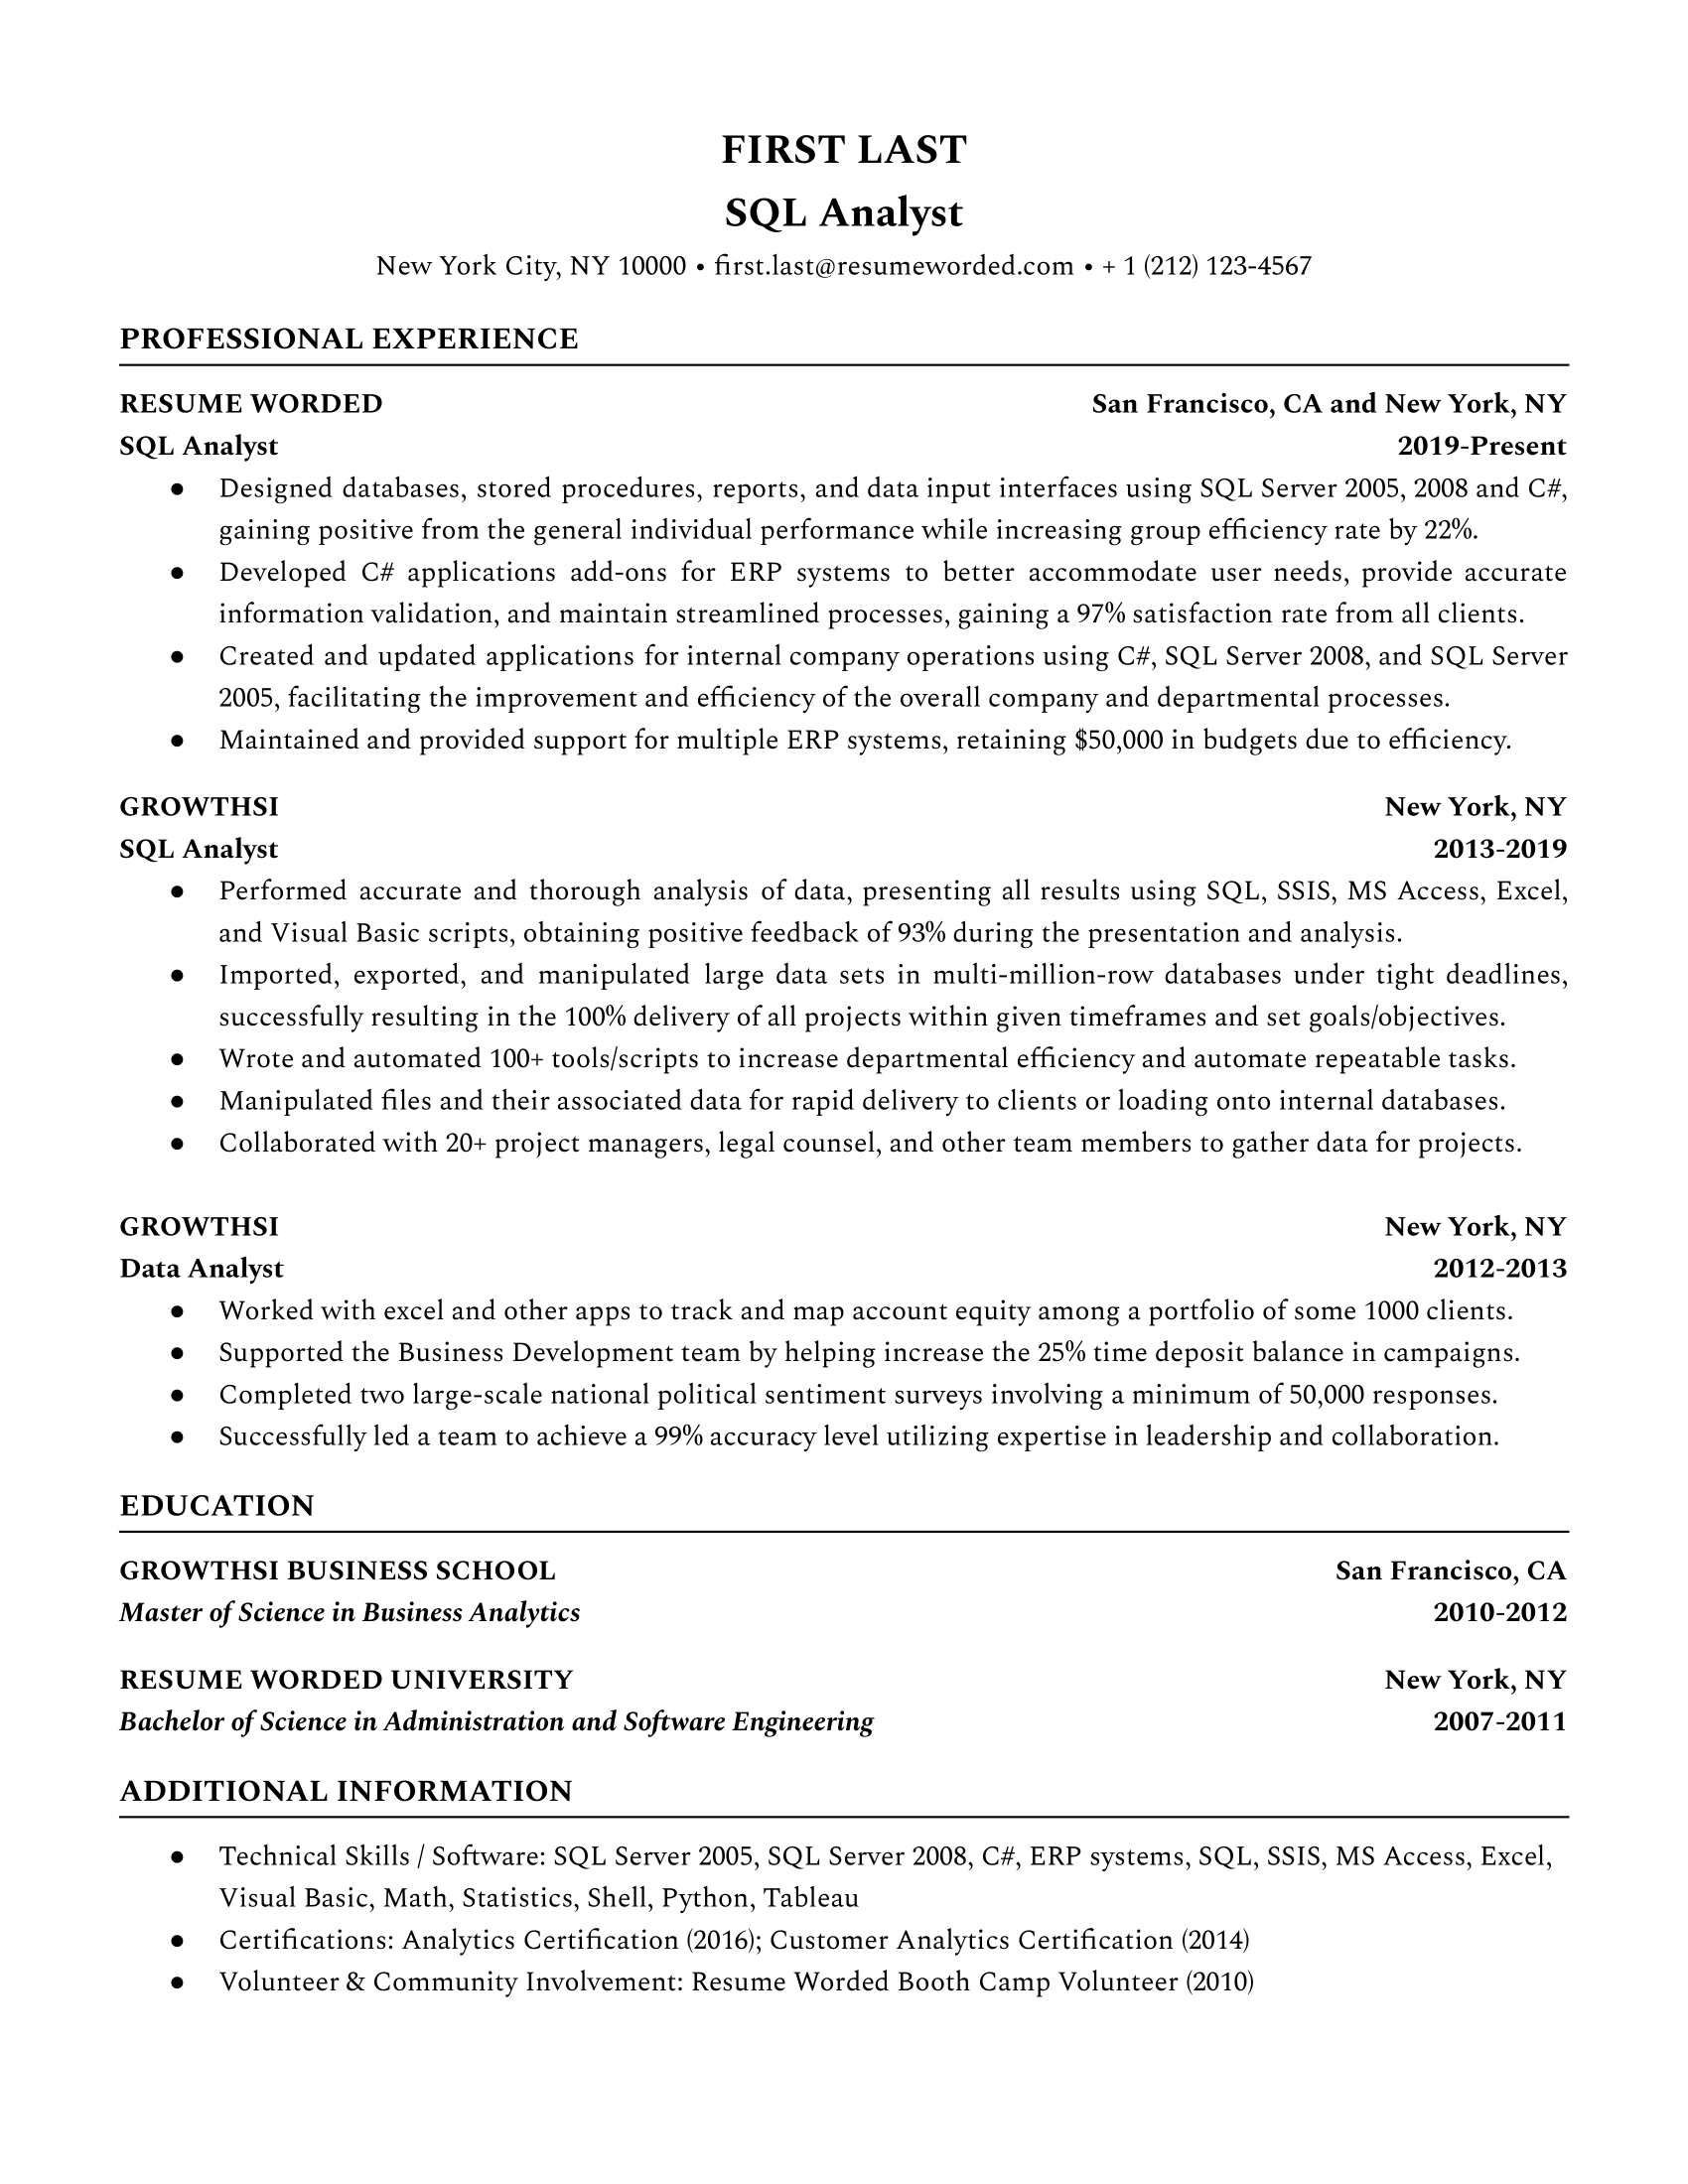 This SQL Analyst resume template demonstrates one's skills and abilities with managing projects involving a great amount of scripts.